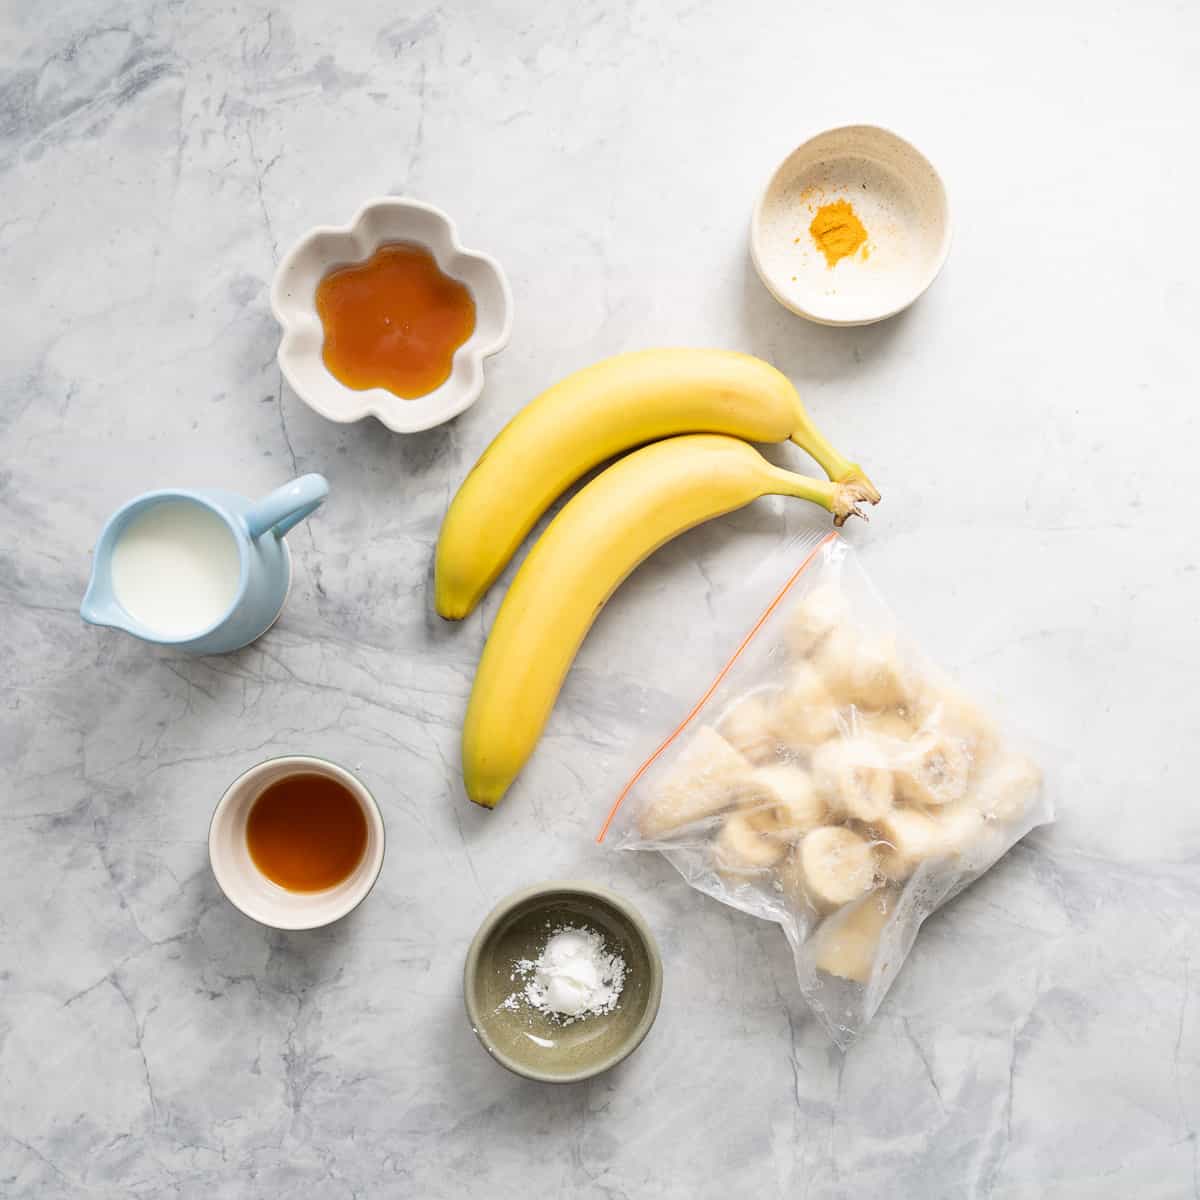 All the ingredients to make the banana popsicles laid out on the bench. 